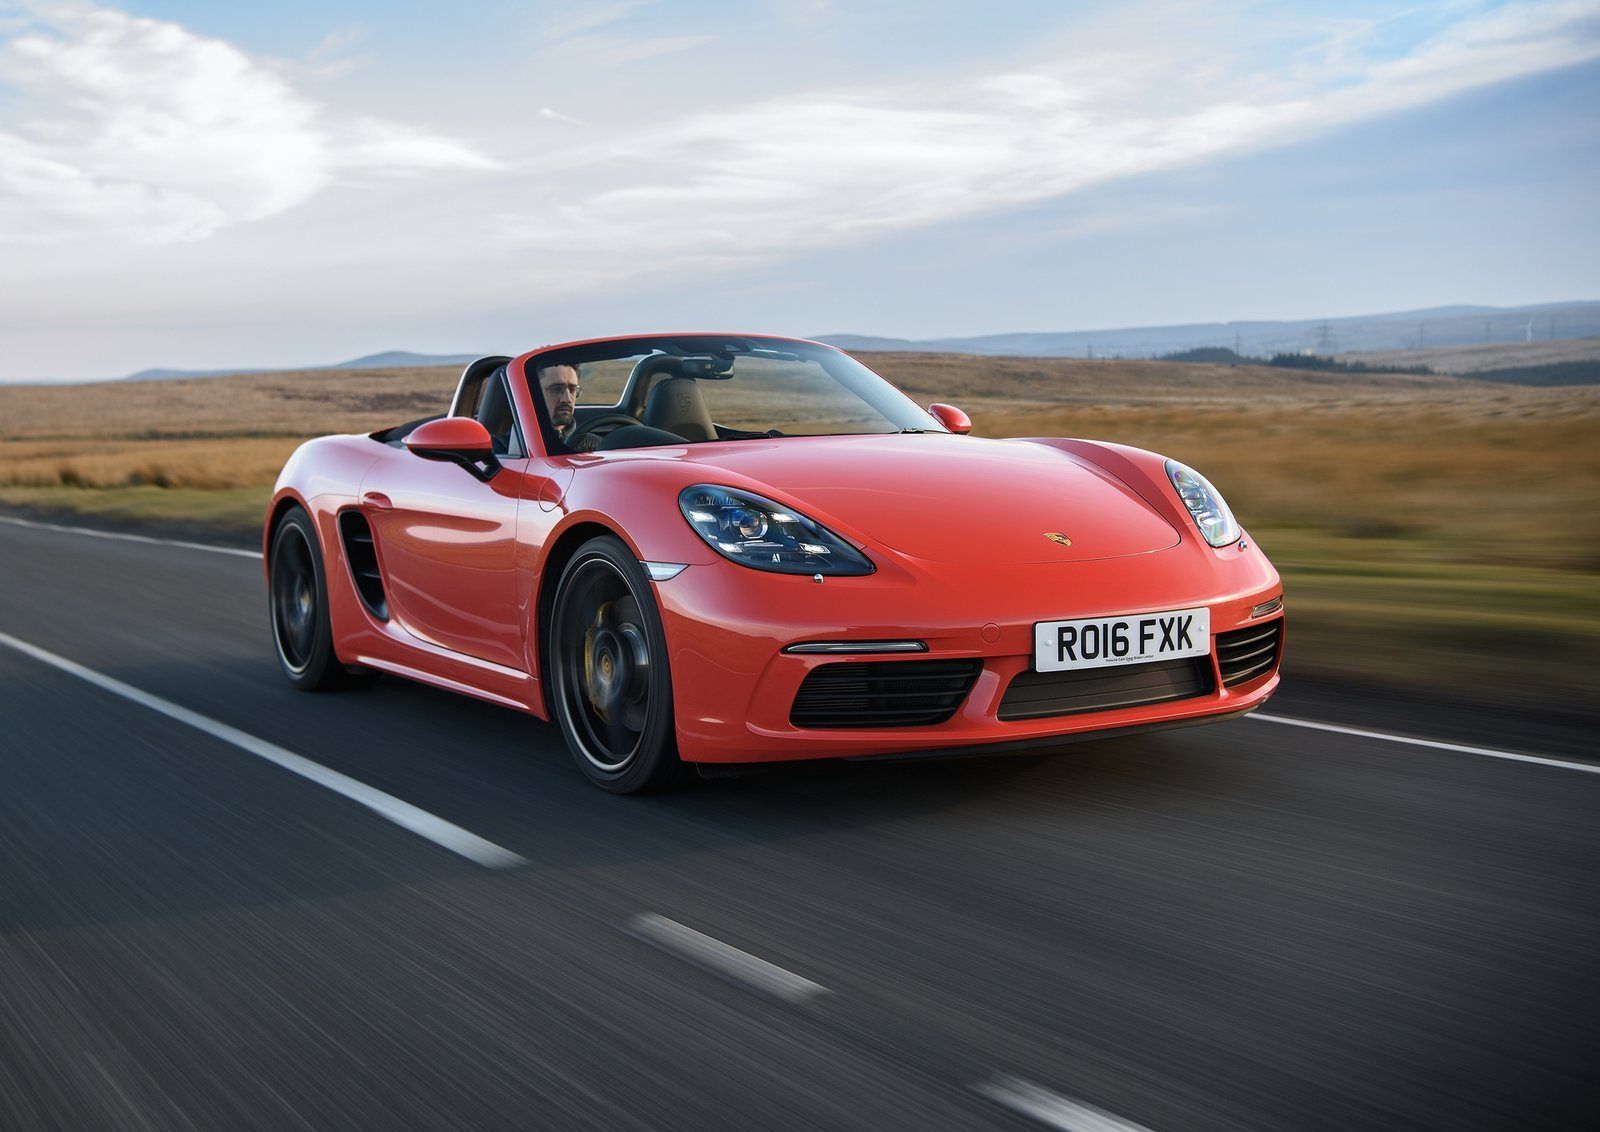 2017 Porsche Boxster on the road